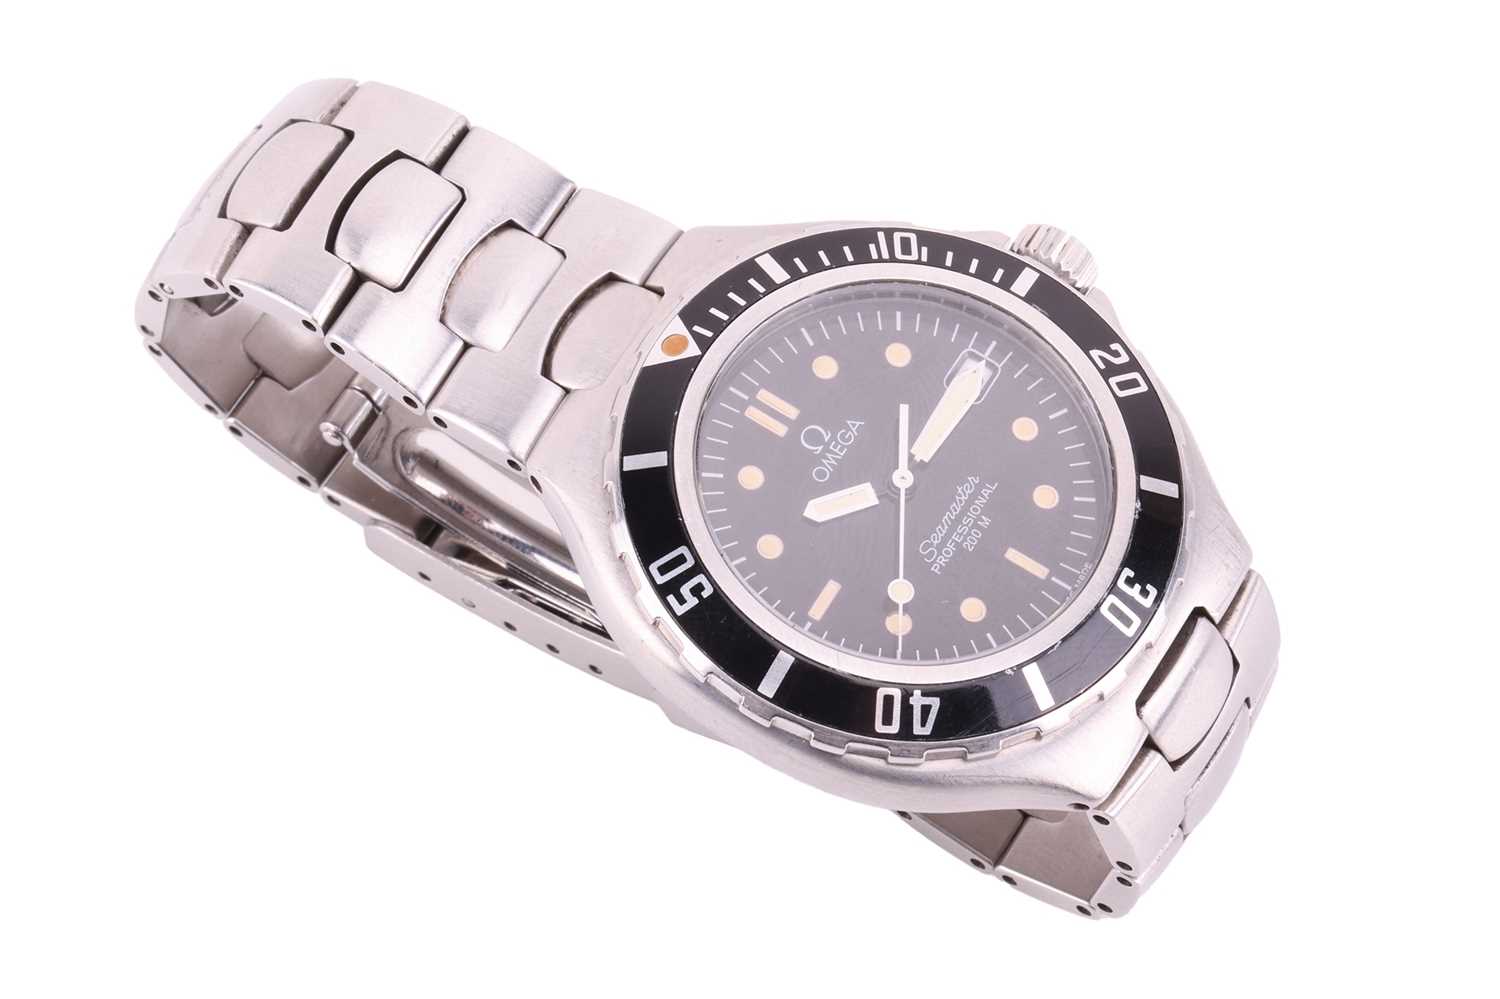 An Omega Seamaster professional 200m diving watch in steel. Model: 396.1052 Serial: 53011249 Year: 1 - Image 2 of 9